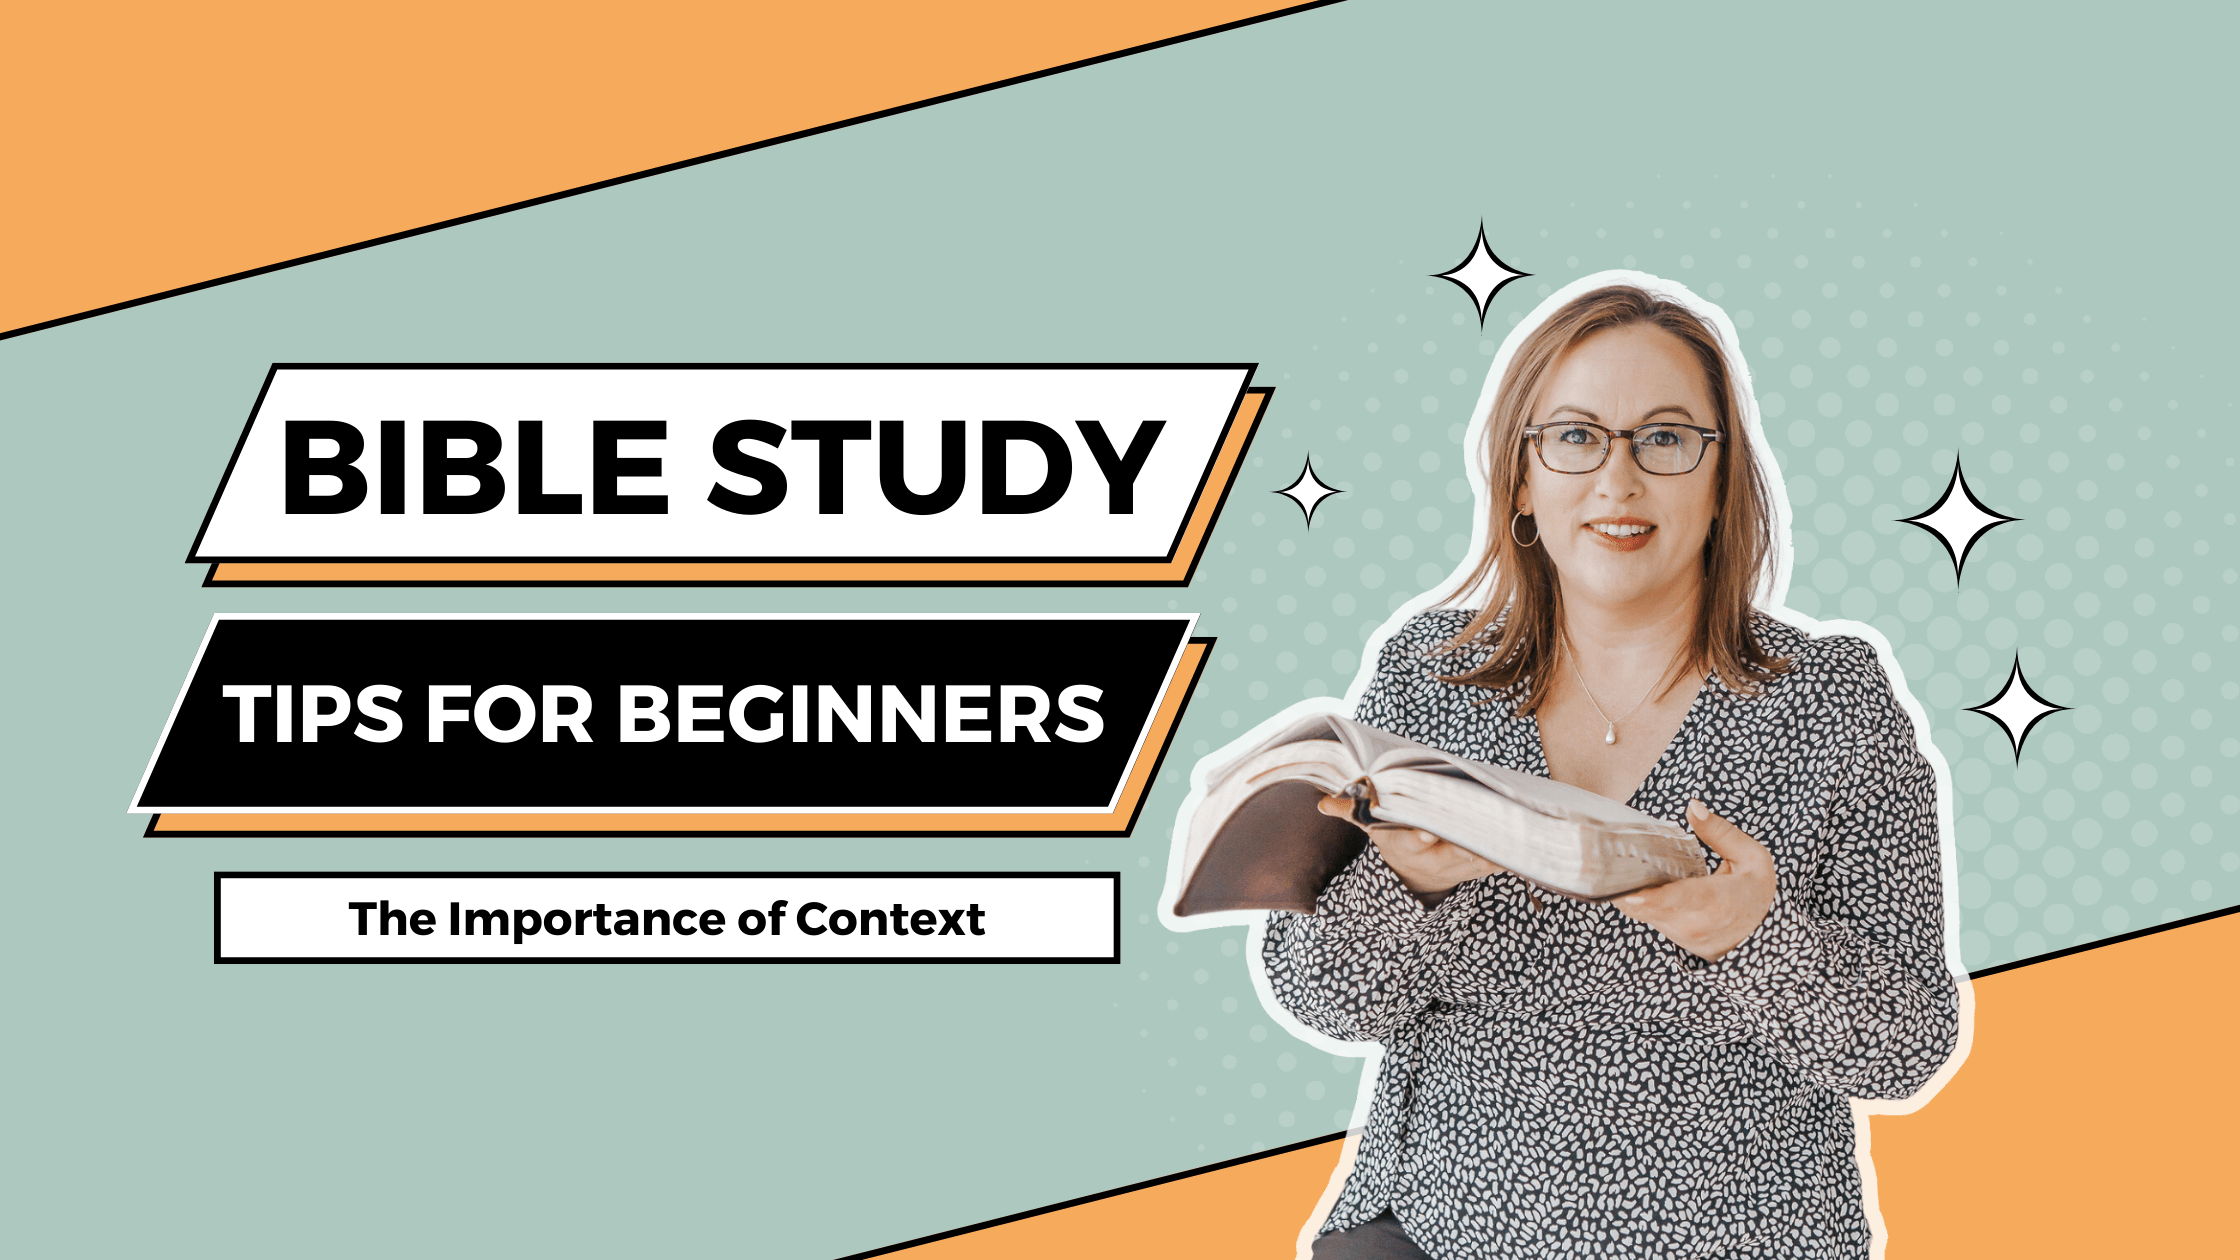 Bible study tips for beginners—the importance of context with Jana Carlson holding a Bible